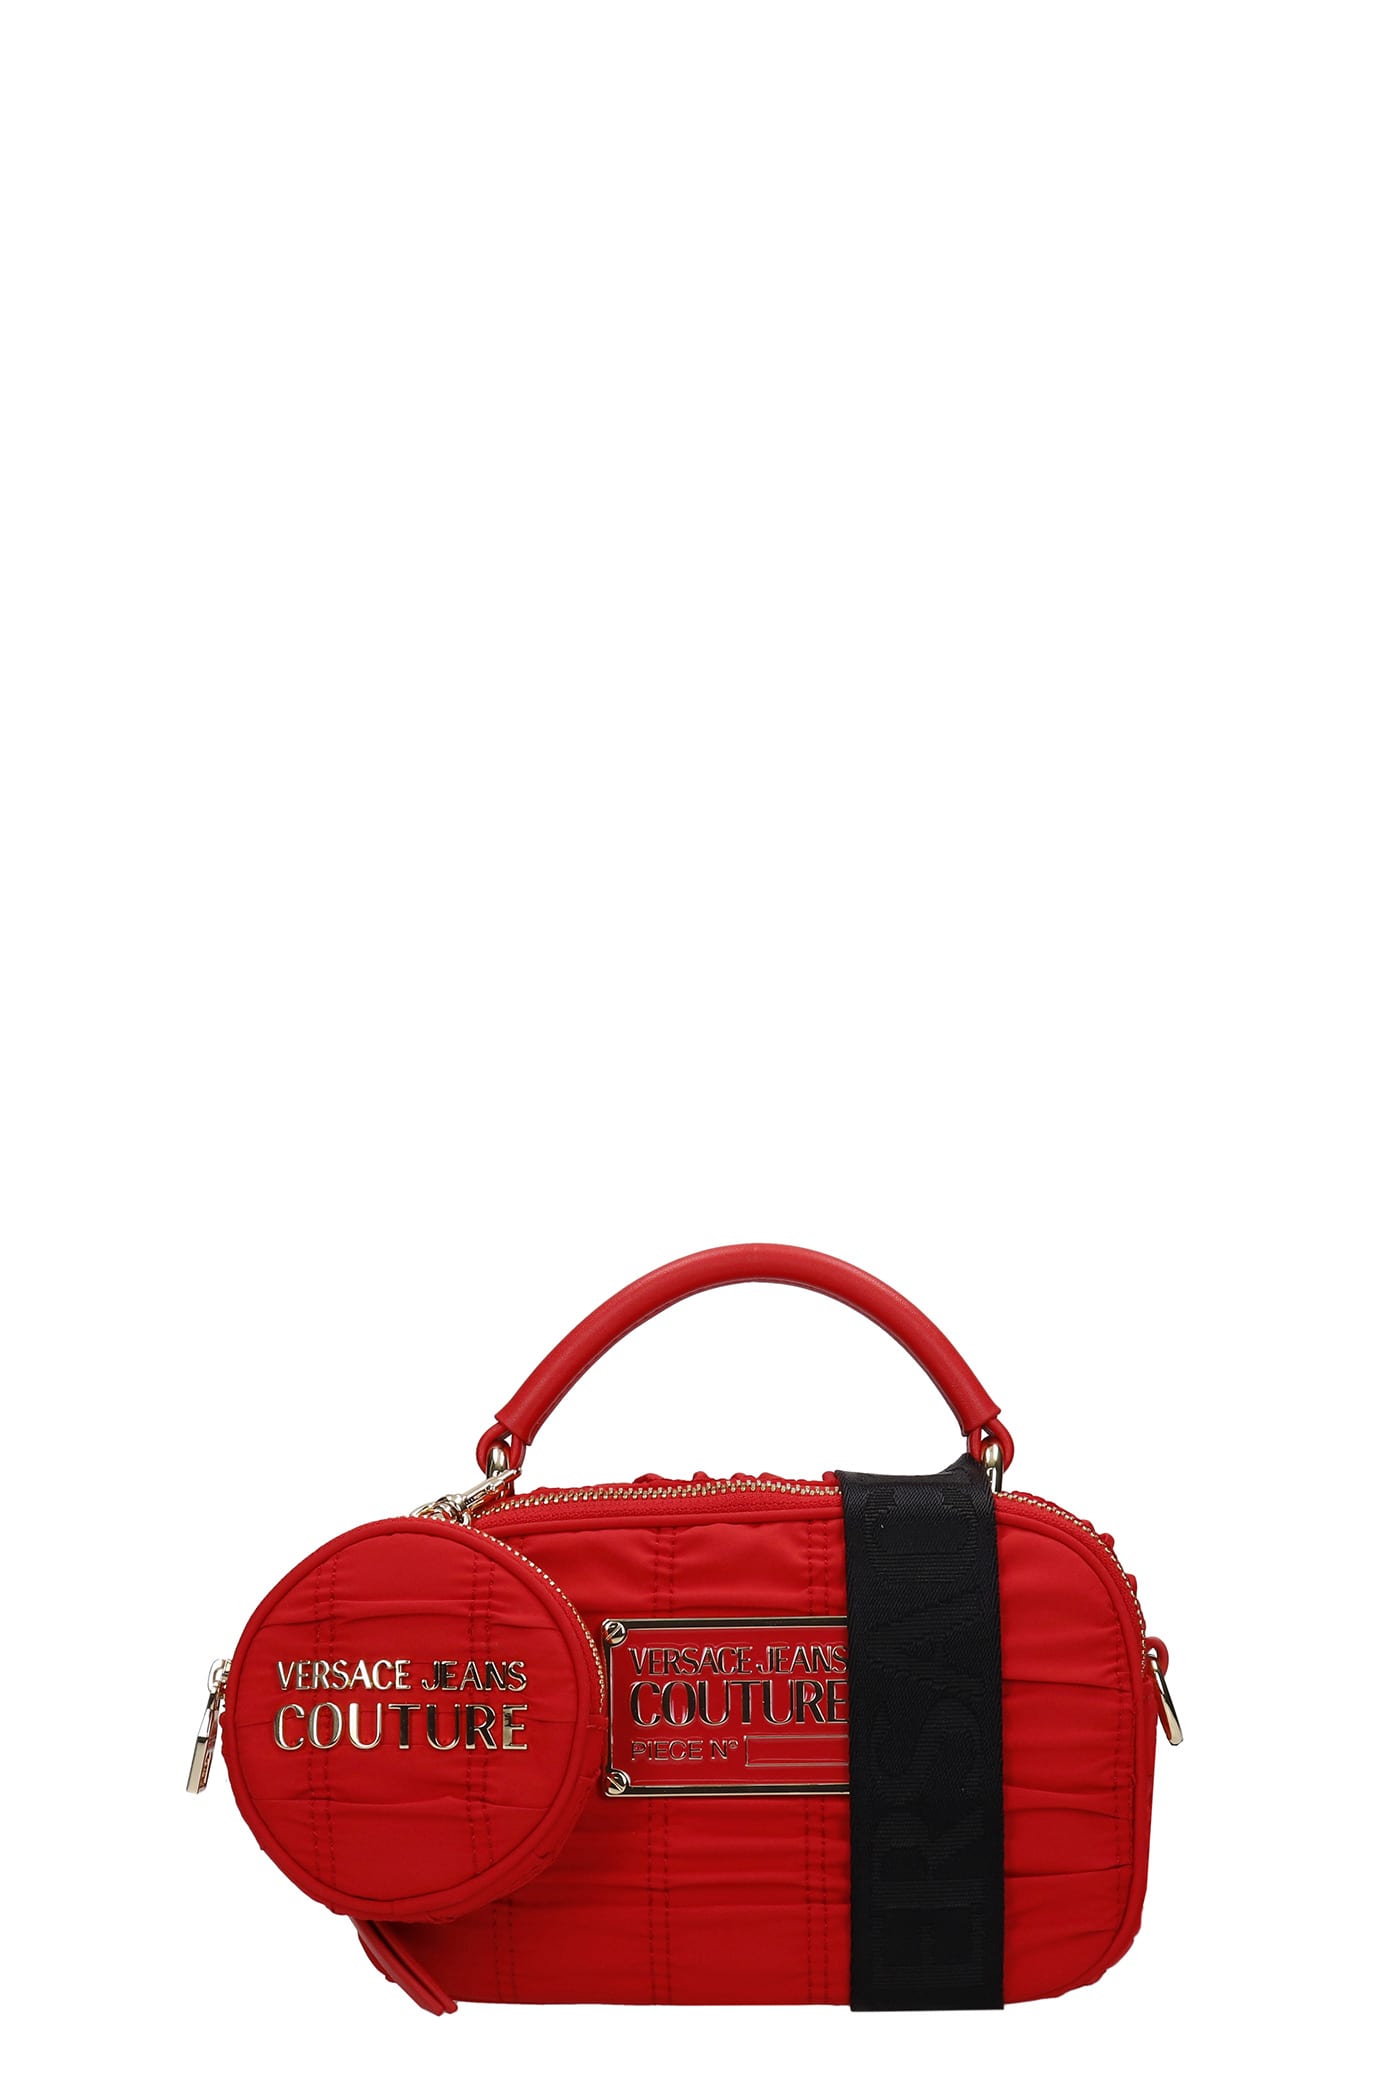 Versace Jeans Couture Hand Bag In Red Nylon